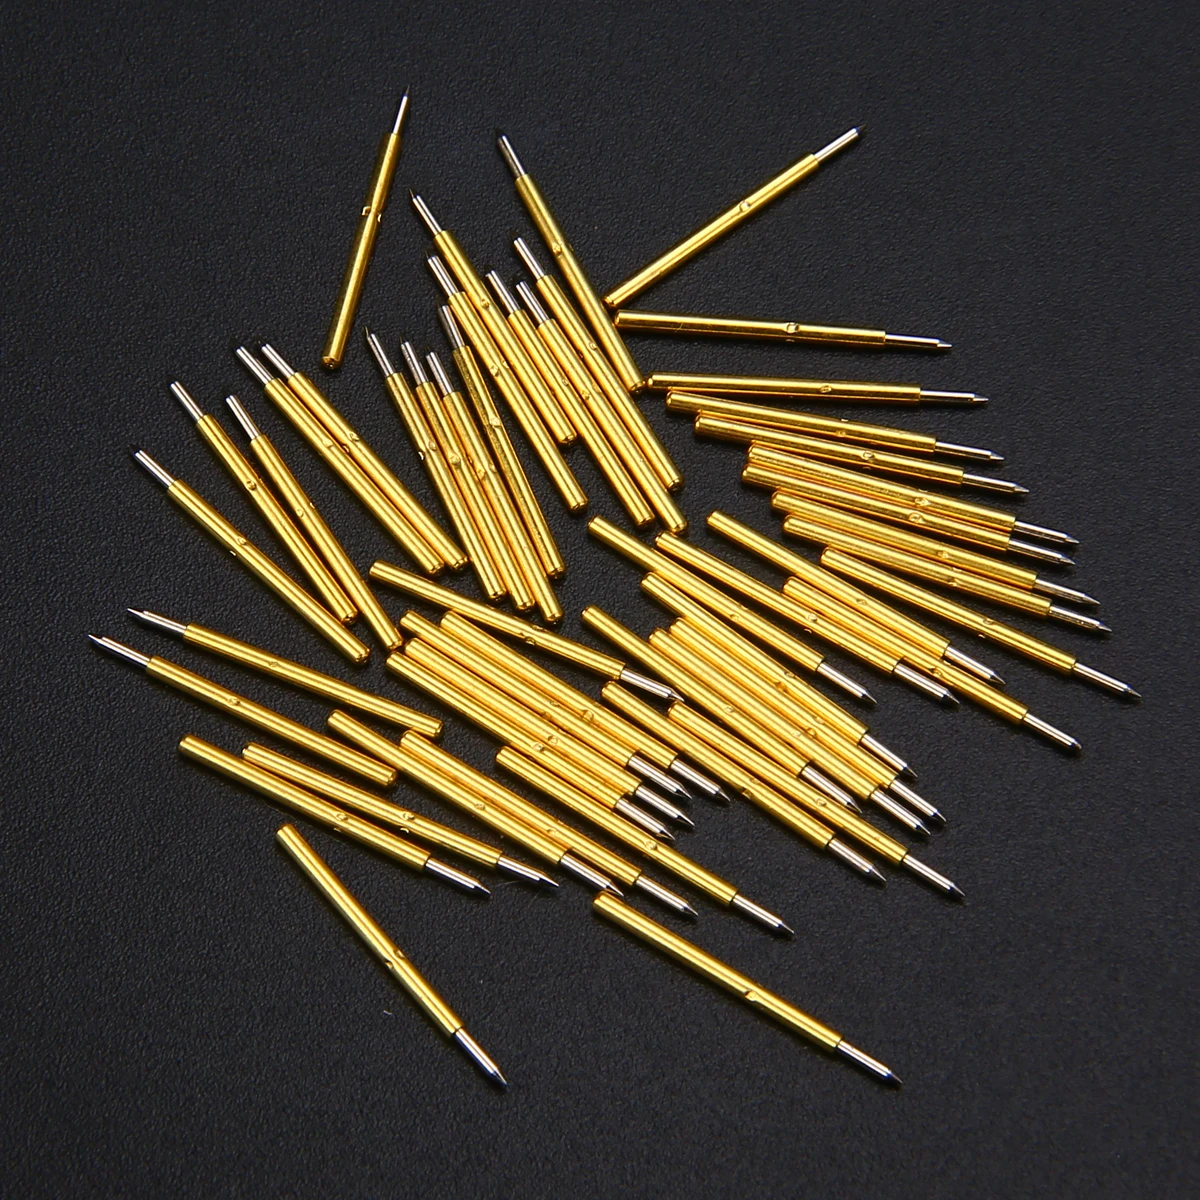 

50pcs P75-B1 Dia 1.02mm 100g Cusp Spring Pressure Spear Spring Loaded Test Probes Pogo Pins 1.02mm Length 16.54mm For Test Tool